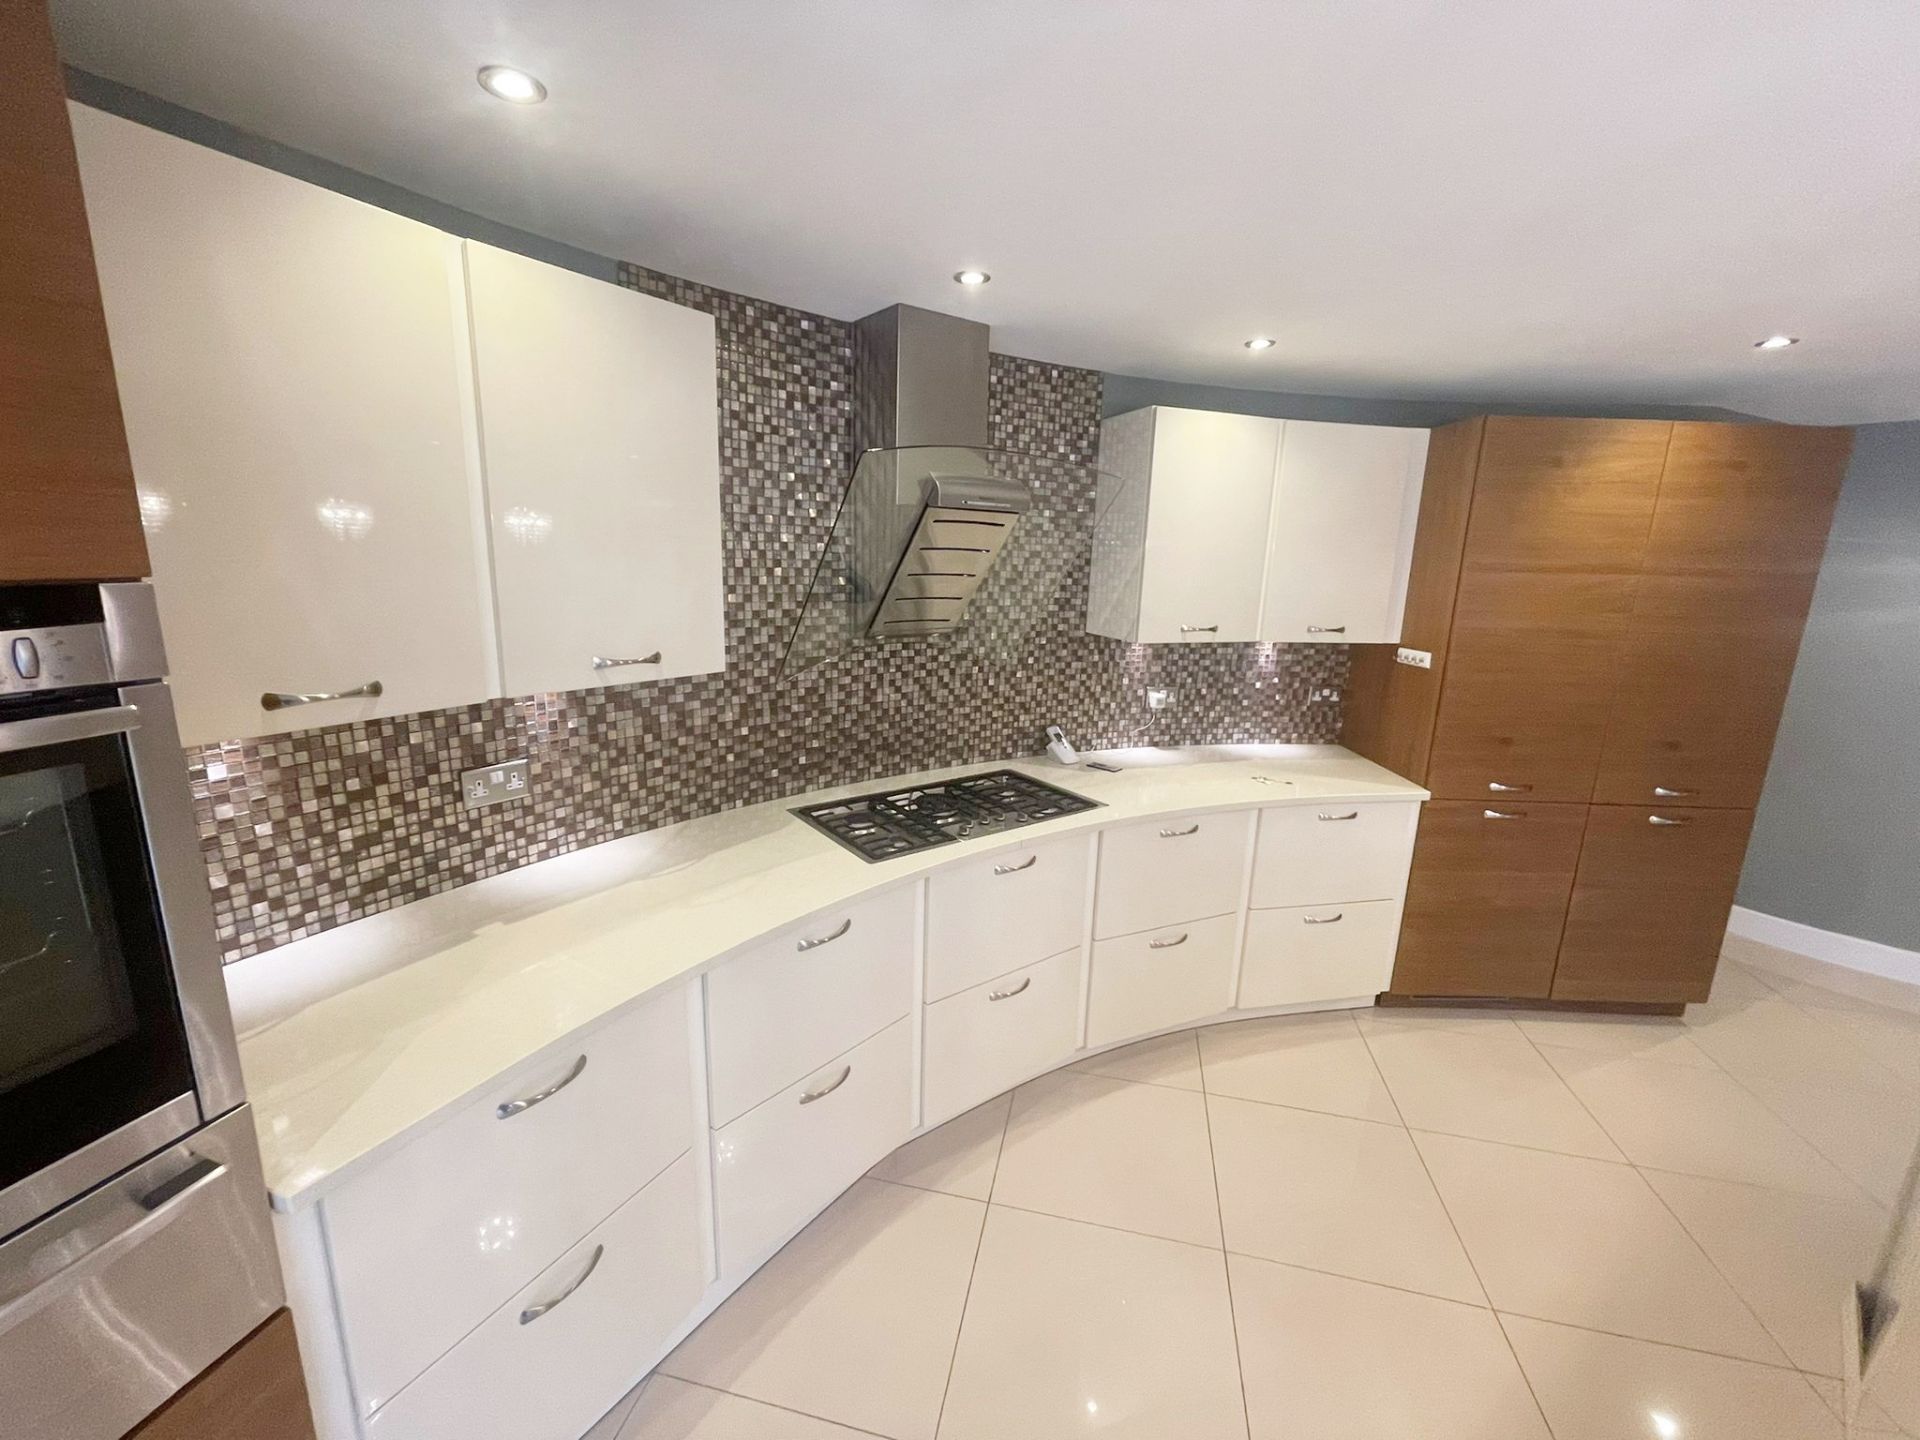 1 x Contemporary ALNO Fitted Kitchen With Branded  Appliances Created By Award Winning Kitchen - Image 22 of 89